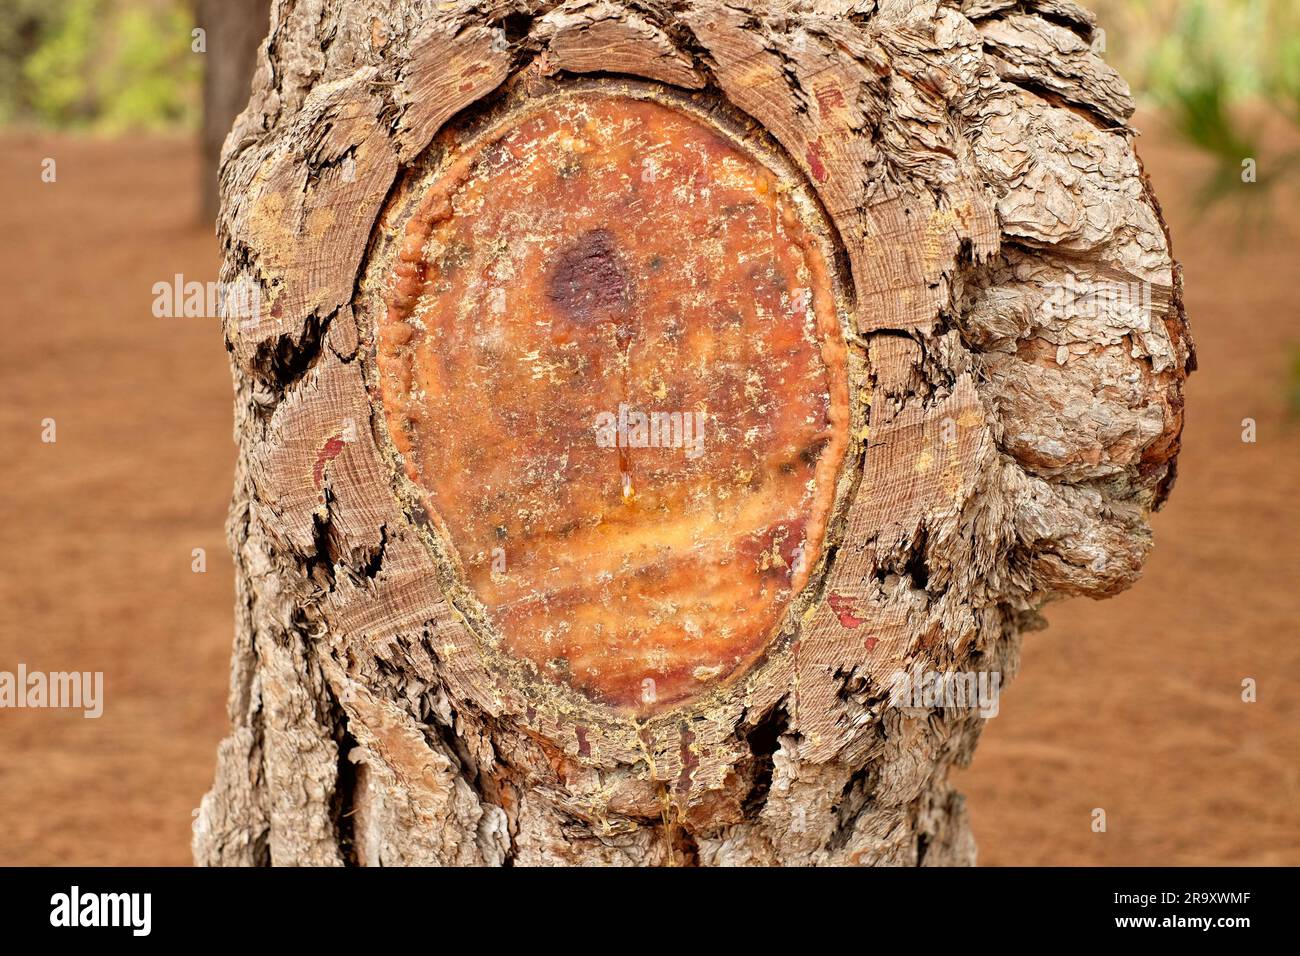 Black pine tree section with bark and a large wood knot covered in natural resin. Stock Photo